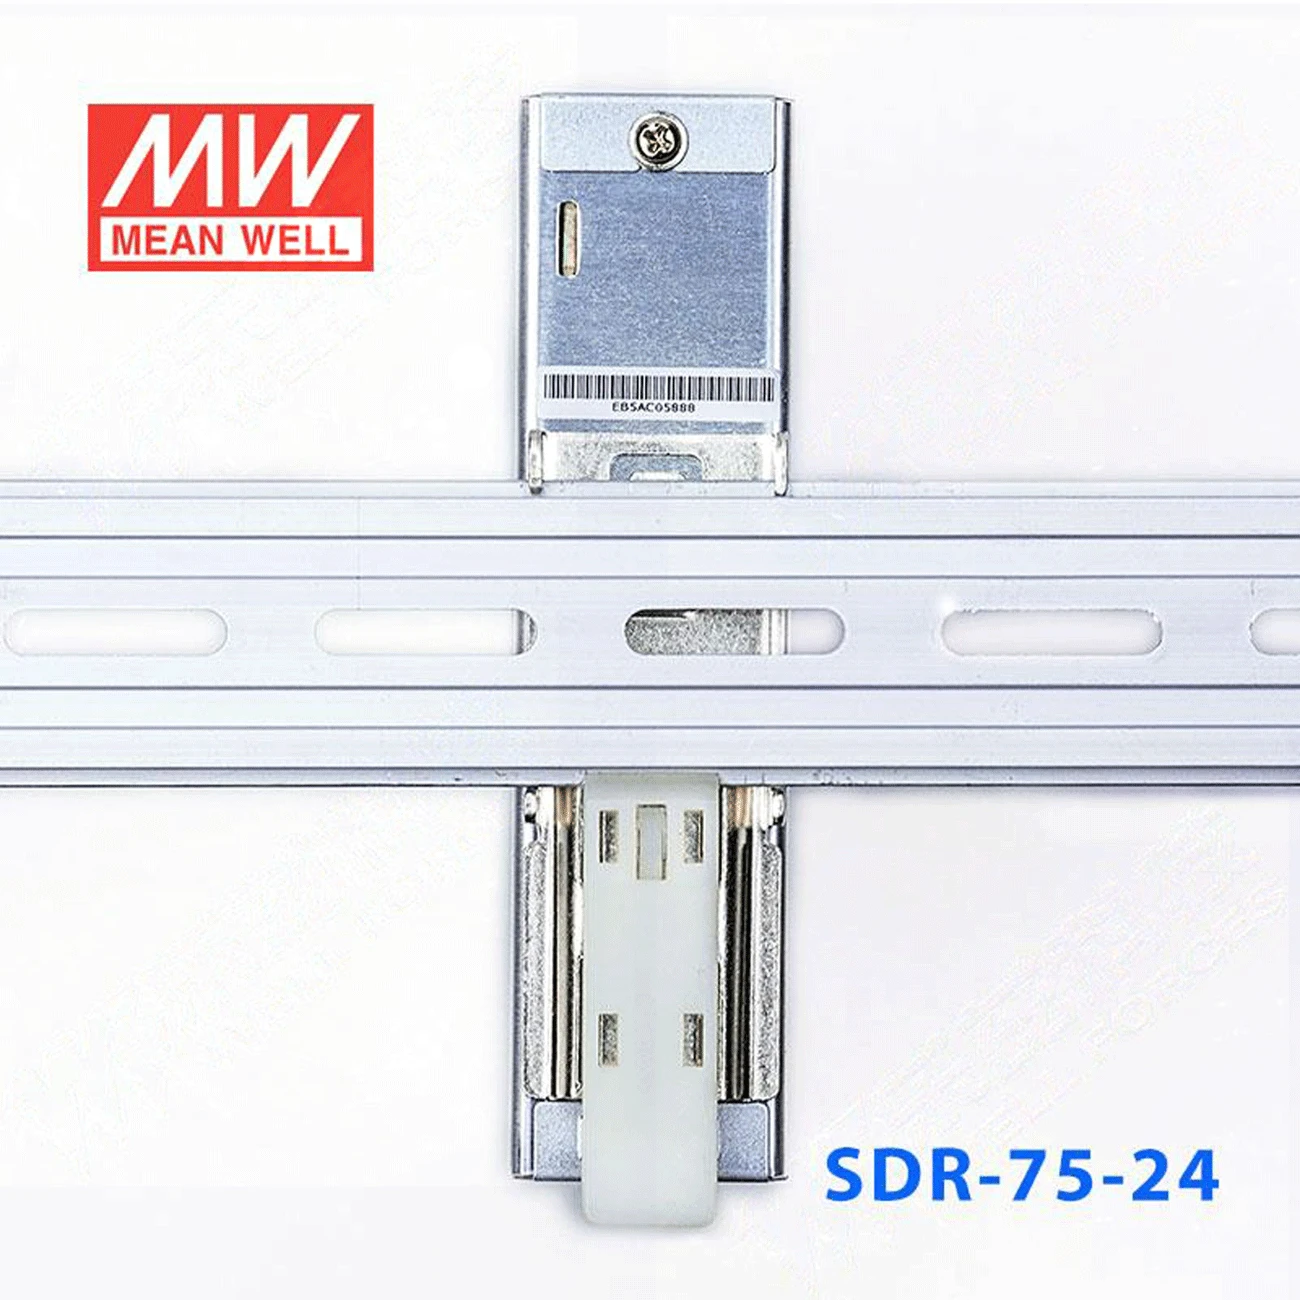 

transmit MEAN WELL Taiwan SDR-75 75W 12/24/48V ultra-thin rail industrial control voltage stabilized switching power supply